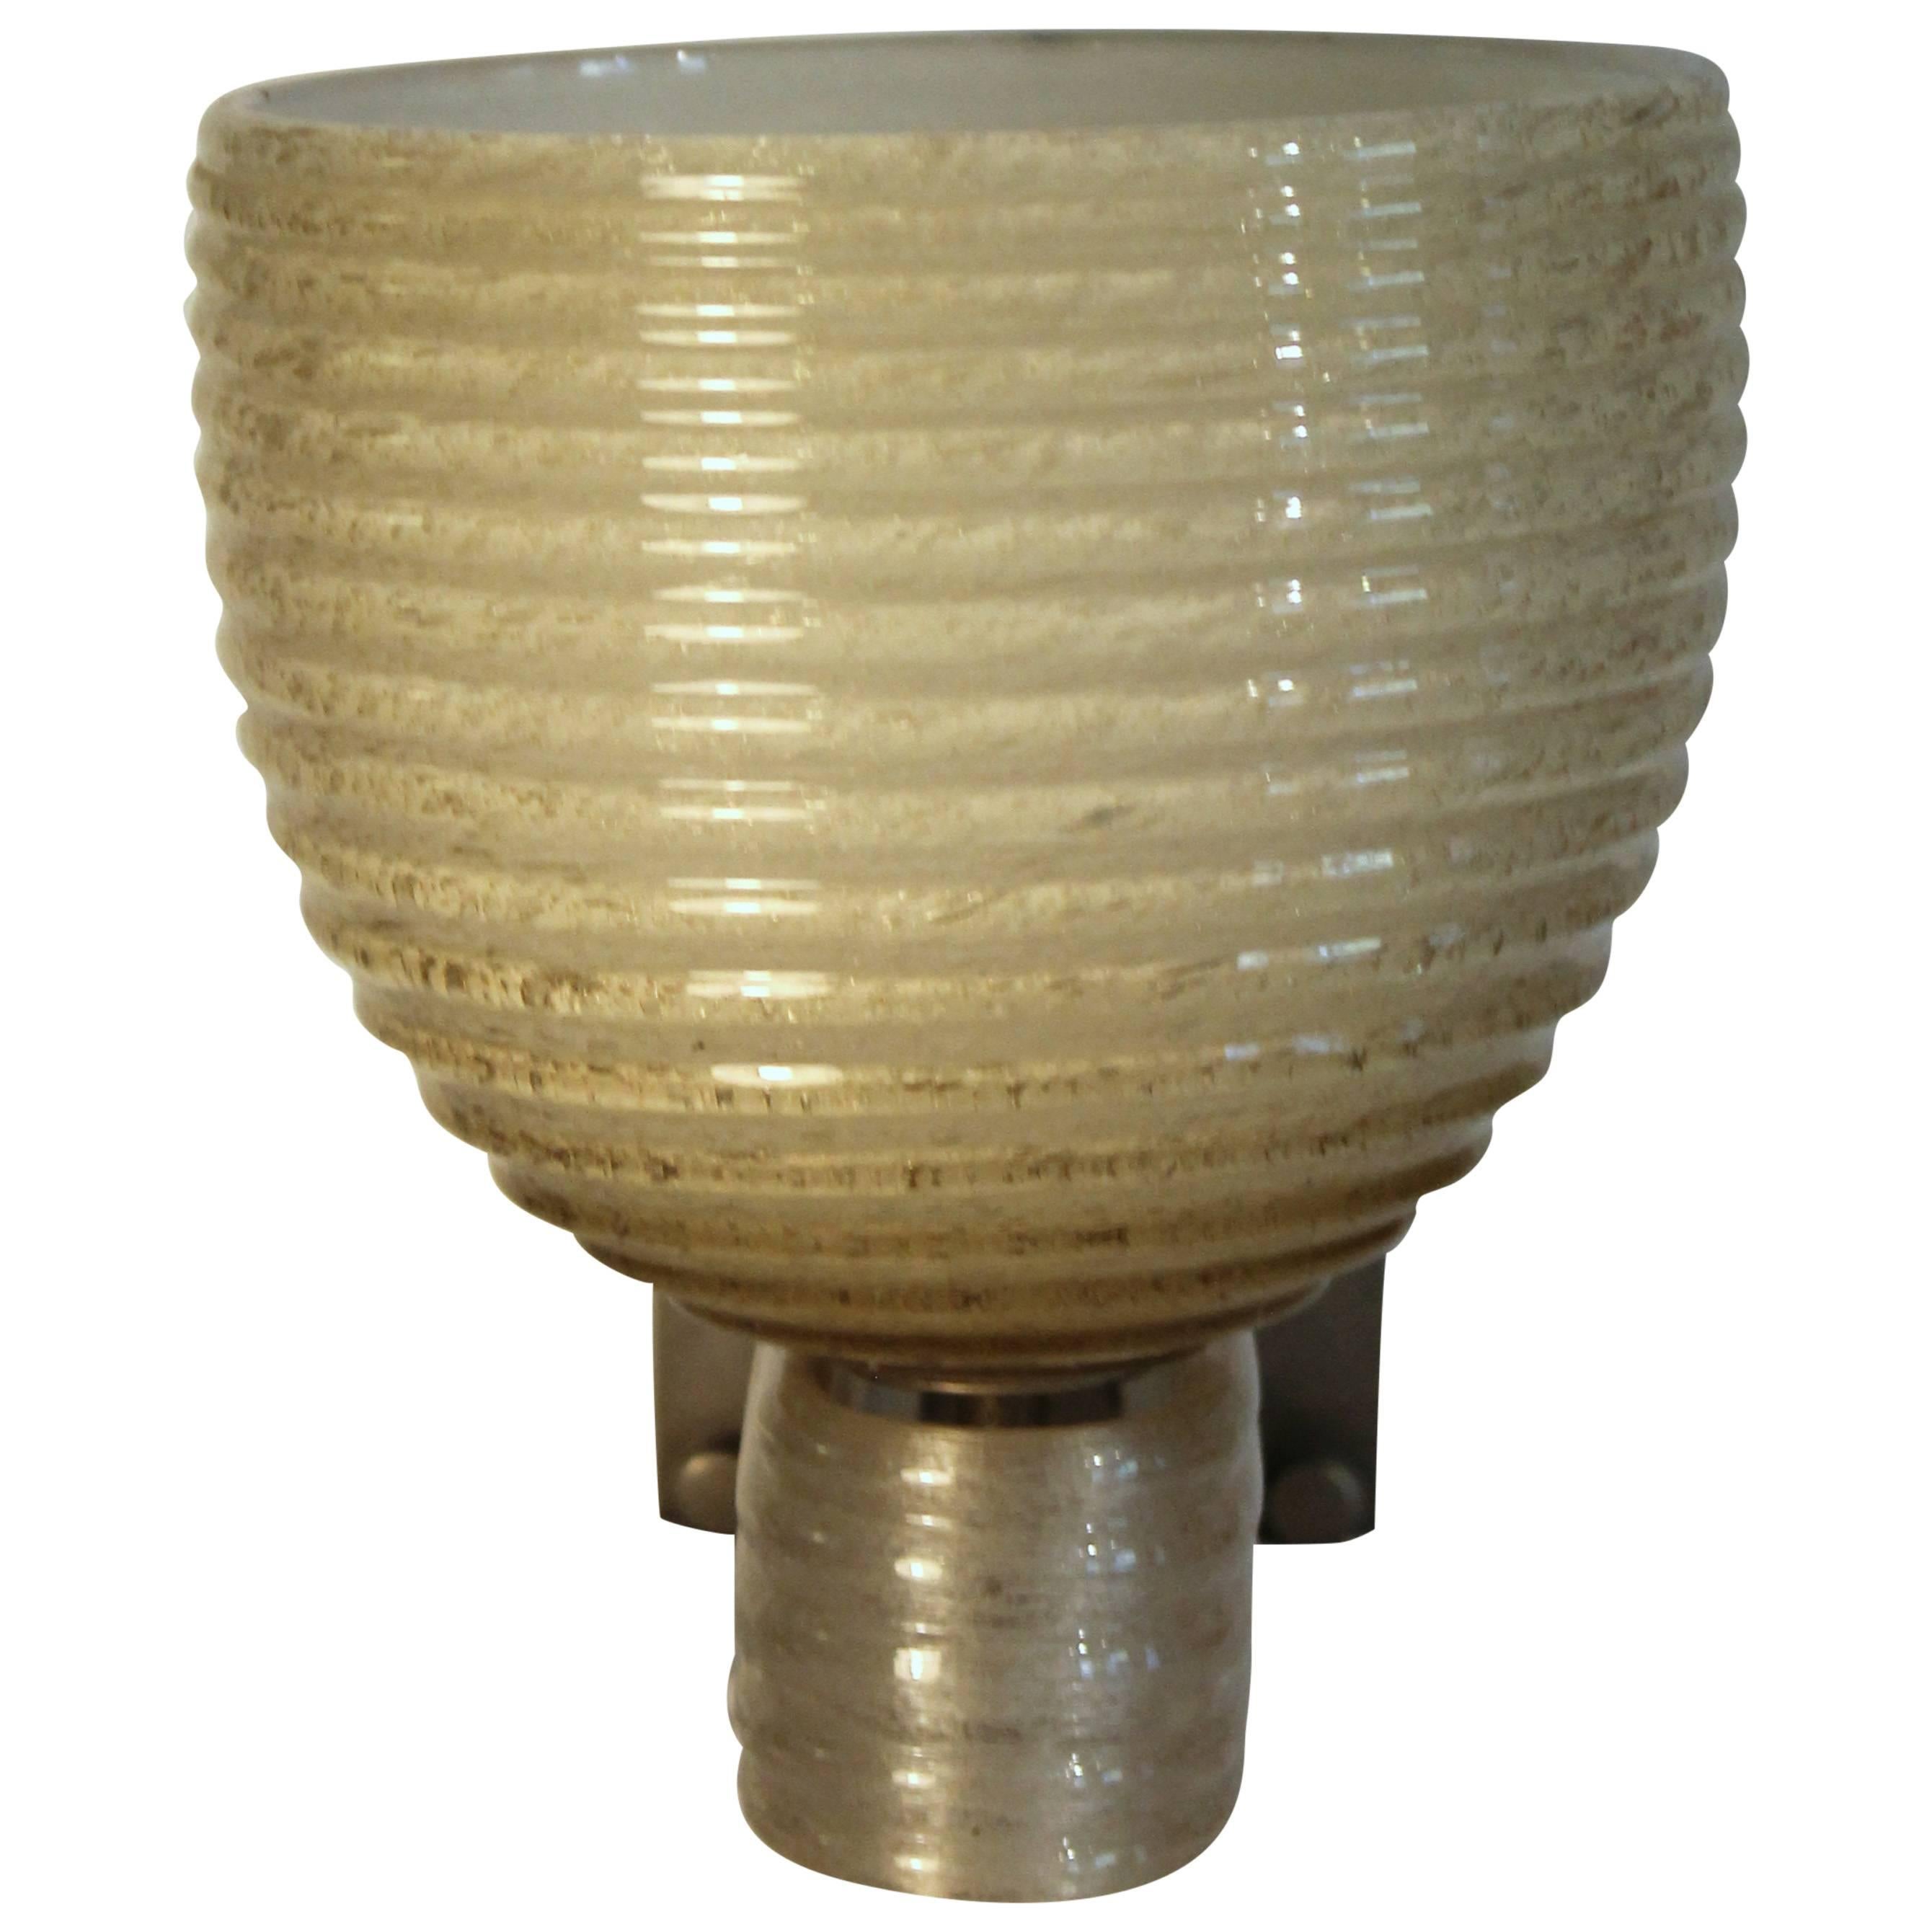 Single Venini sconce with bubble glass cup and support, wall bracket nickel-plated metal, dated 1923-1925.

Designed by Tomaso Buzzi.

References:

Tomaso Buzzi alla Venini, Skira catalogue 2014
Cambi auction 262 lot. n°332